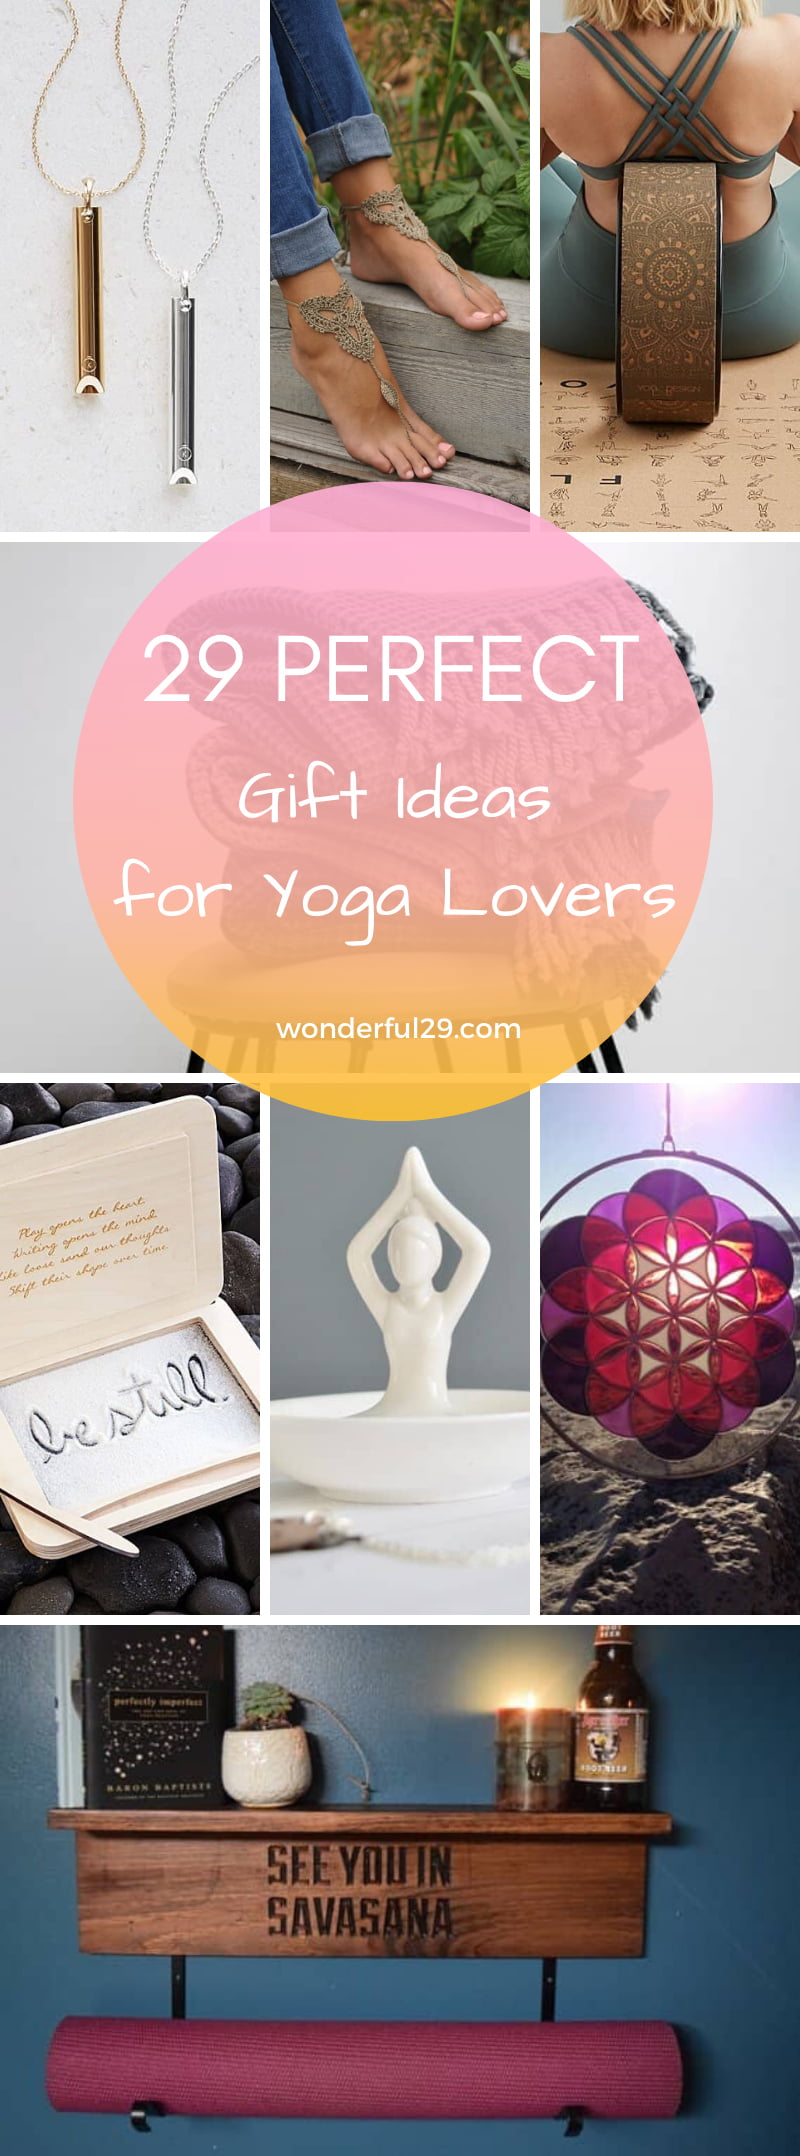 Gifts for Yoga Lovers